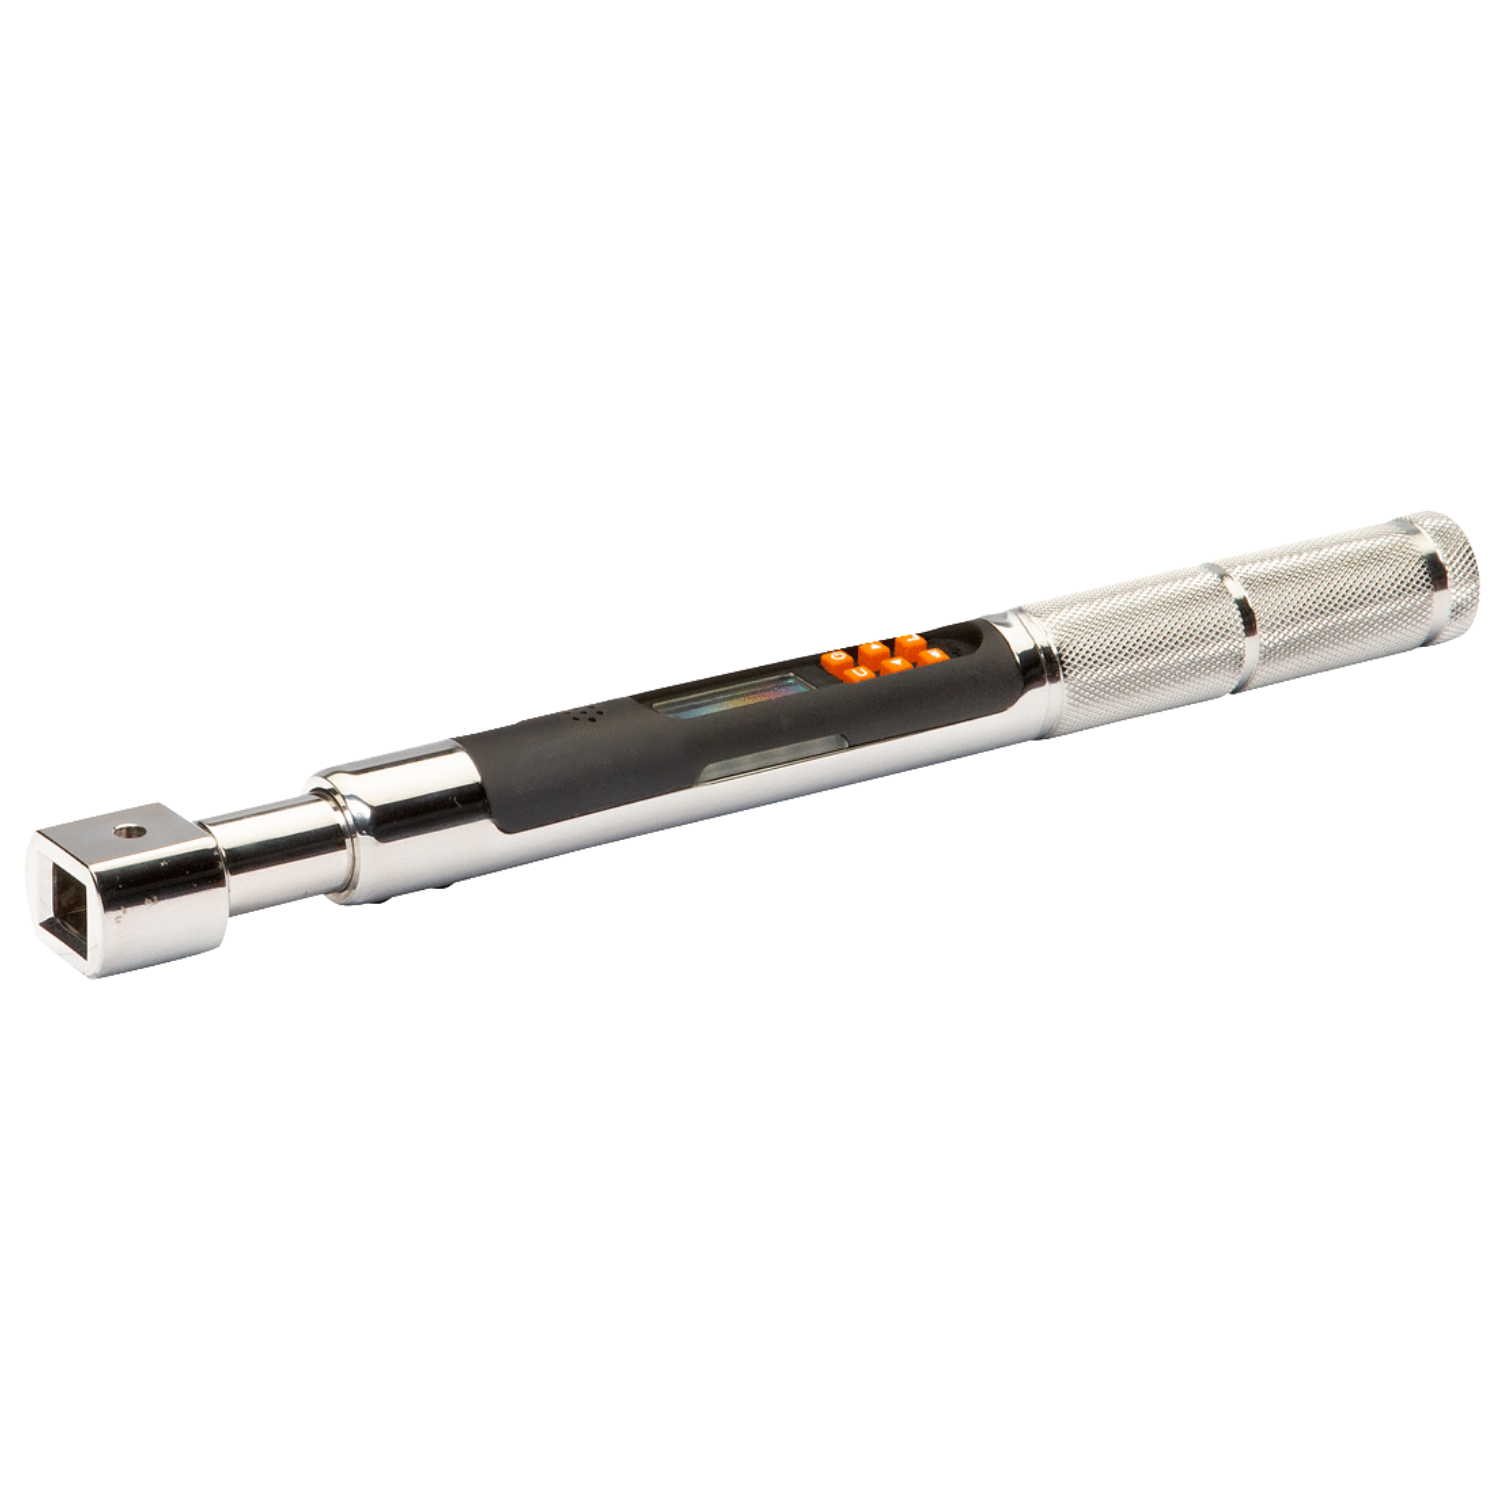 BAHCO TAWMB MICRO Digital Torque Wrench (BAHCO Tools) - Premium Torque Wrench from BAHCO - Shop now at Yew Aik.